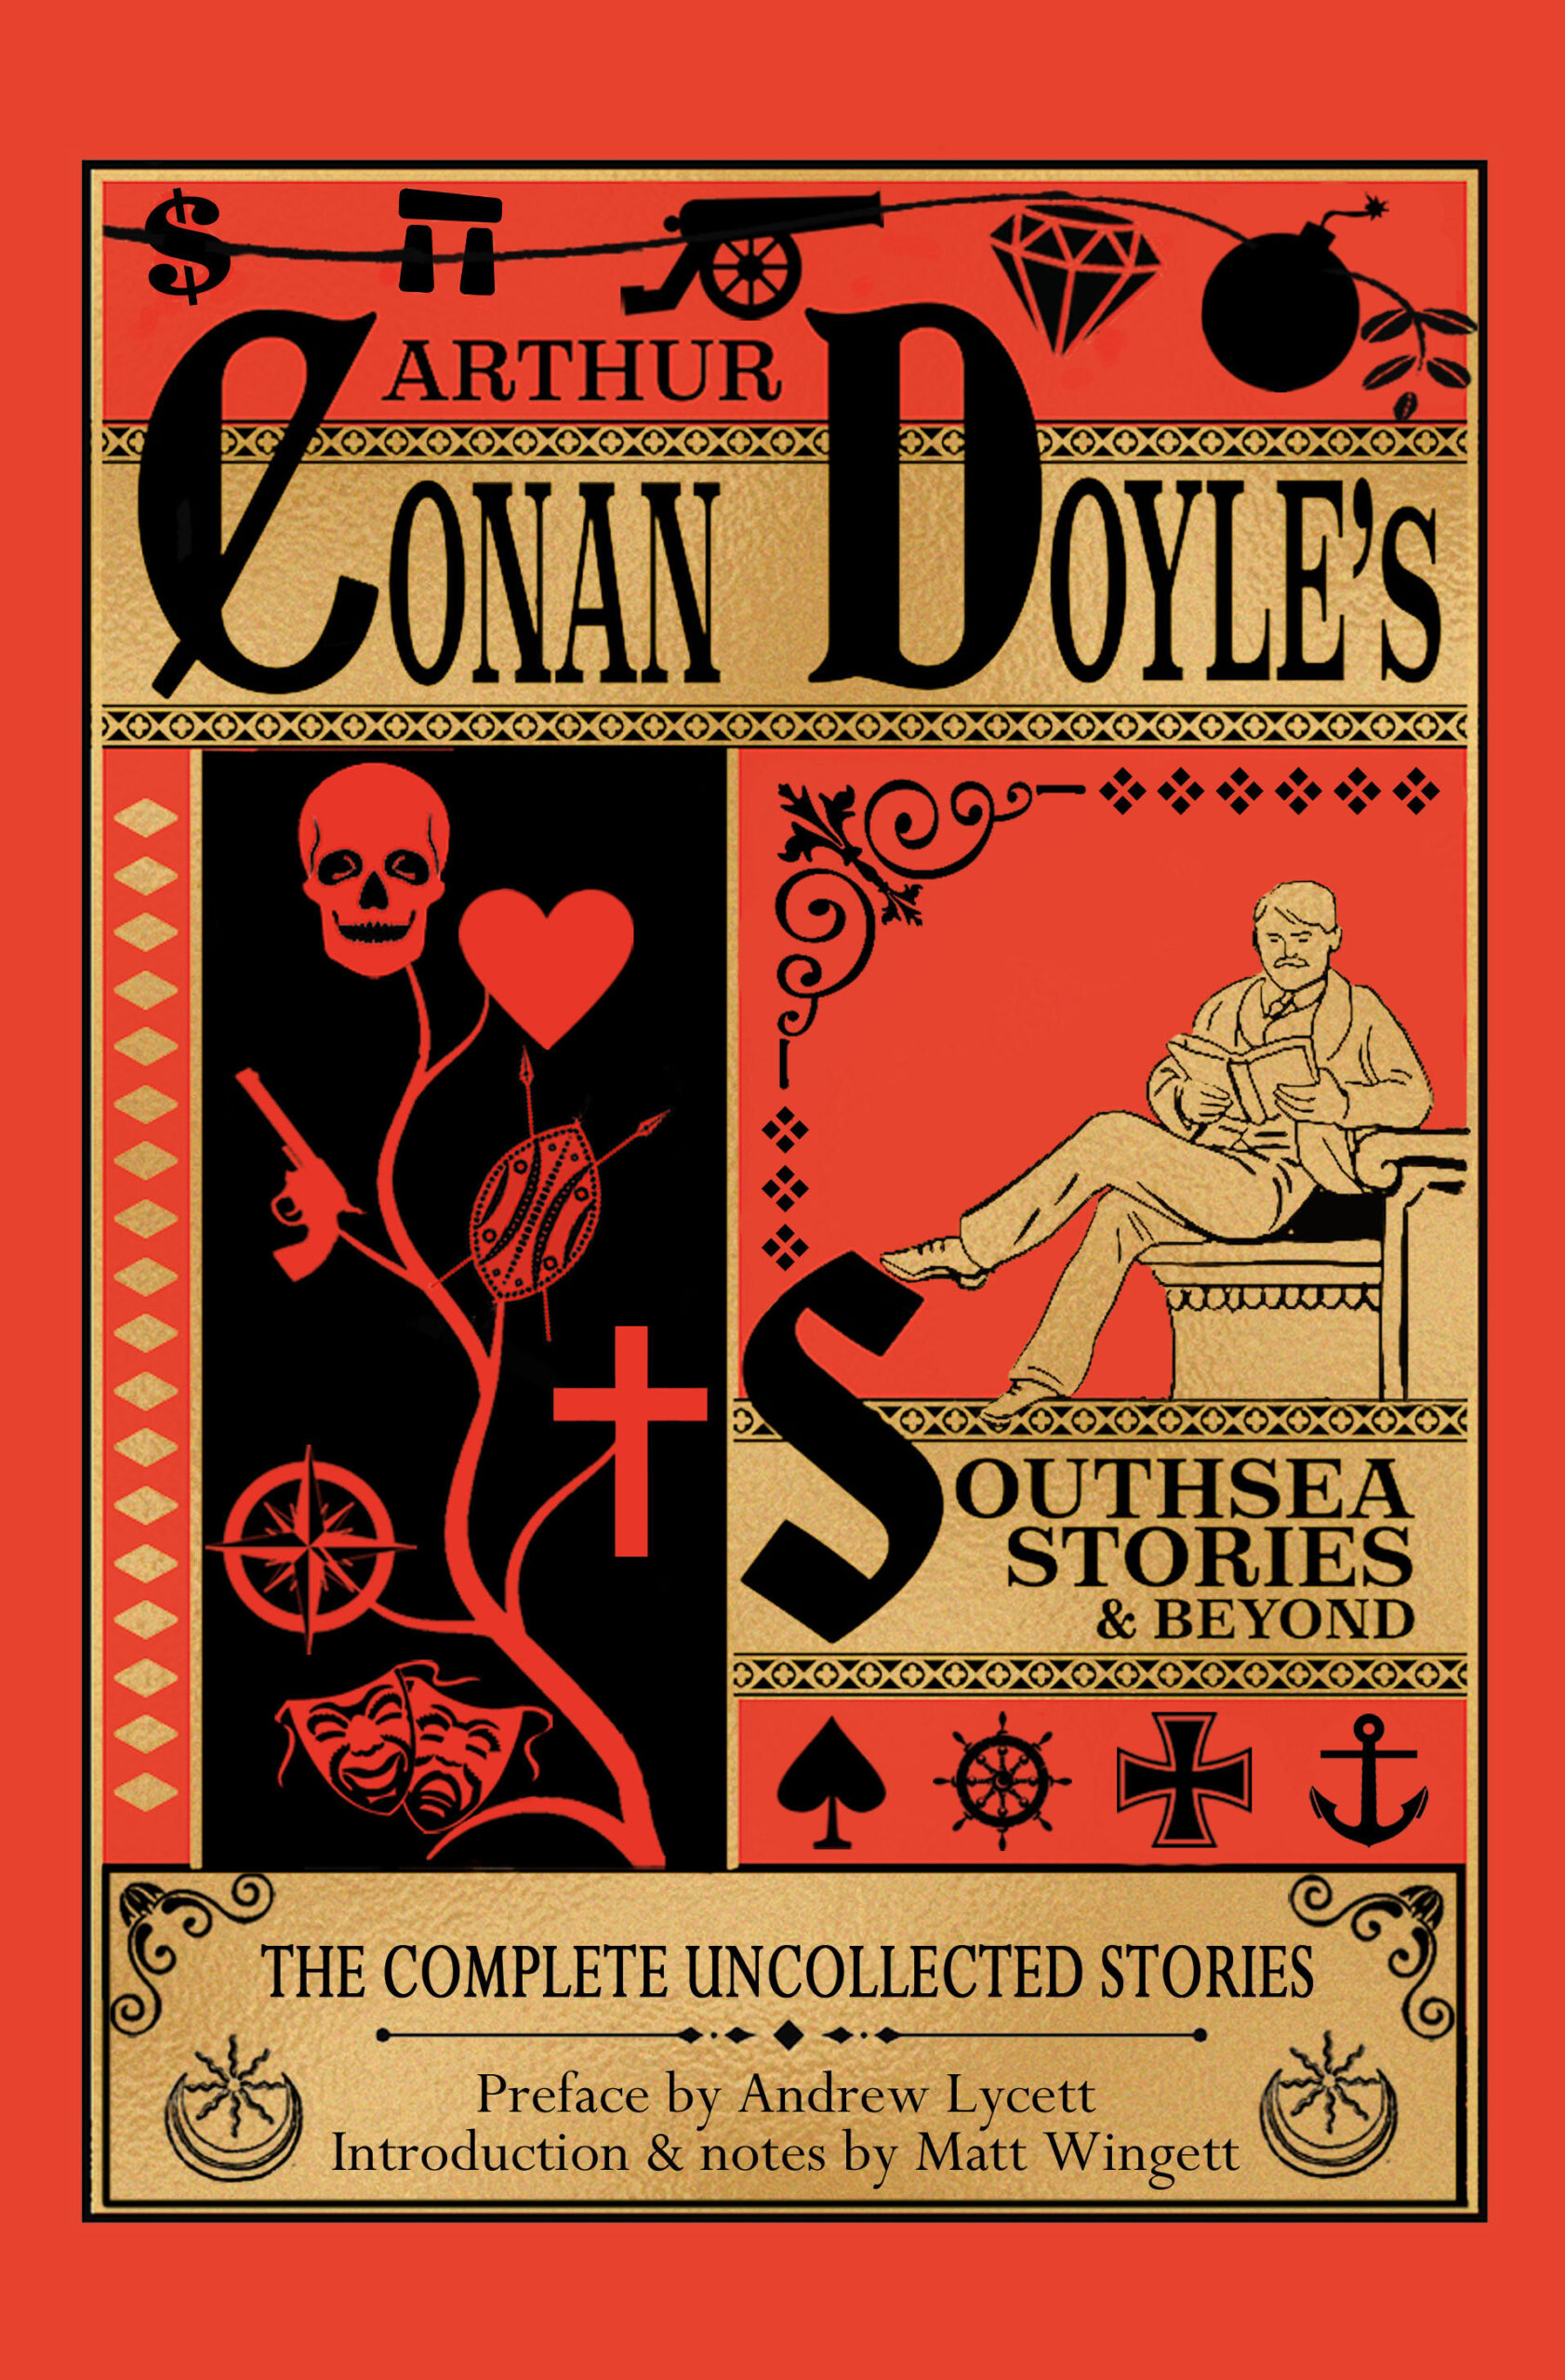 The cover to Arthur Conan Doyle's Southsea Stories and Beyond in Victorian style